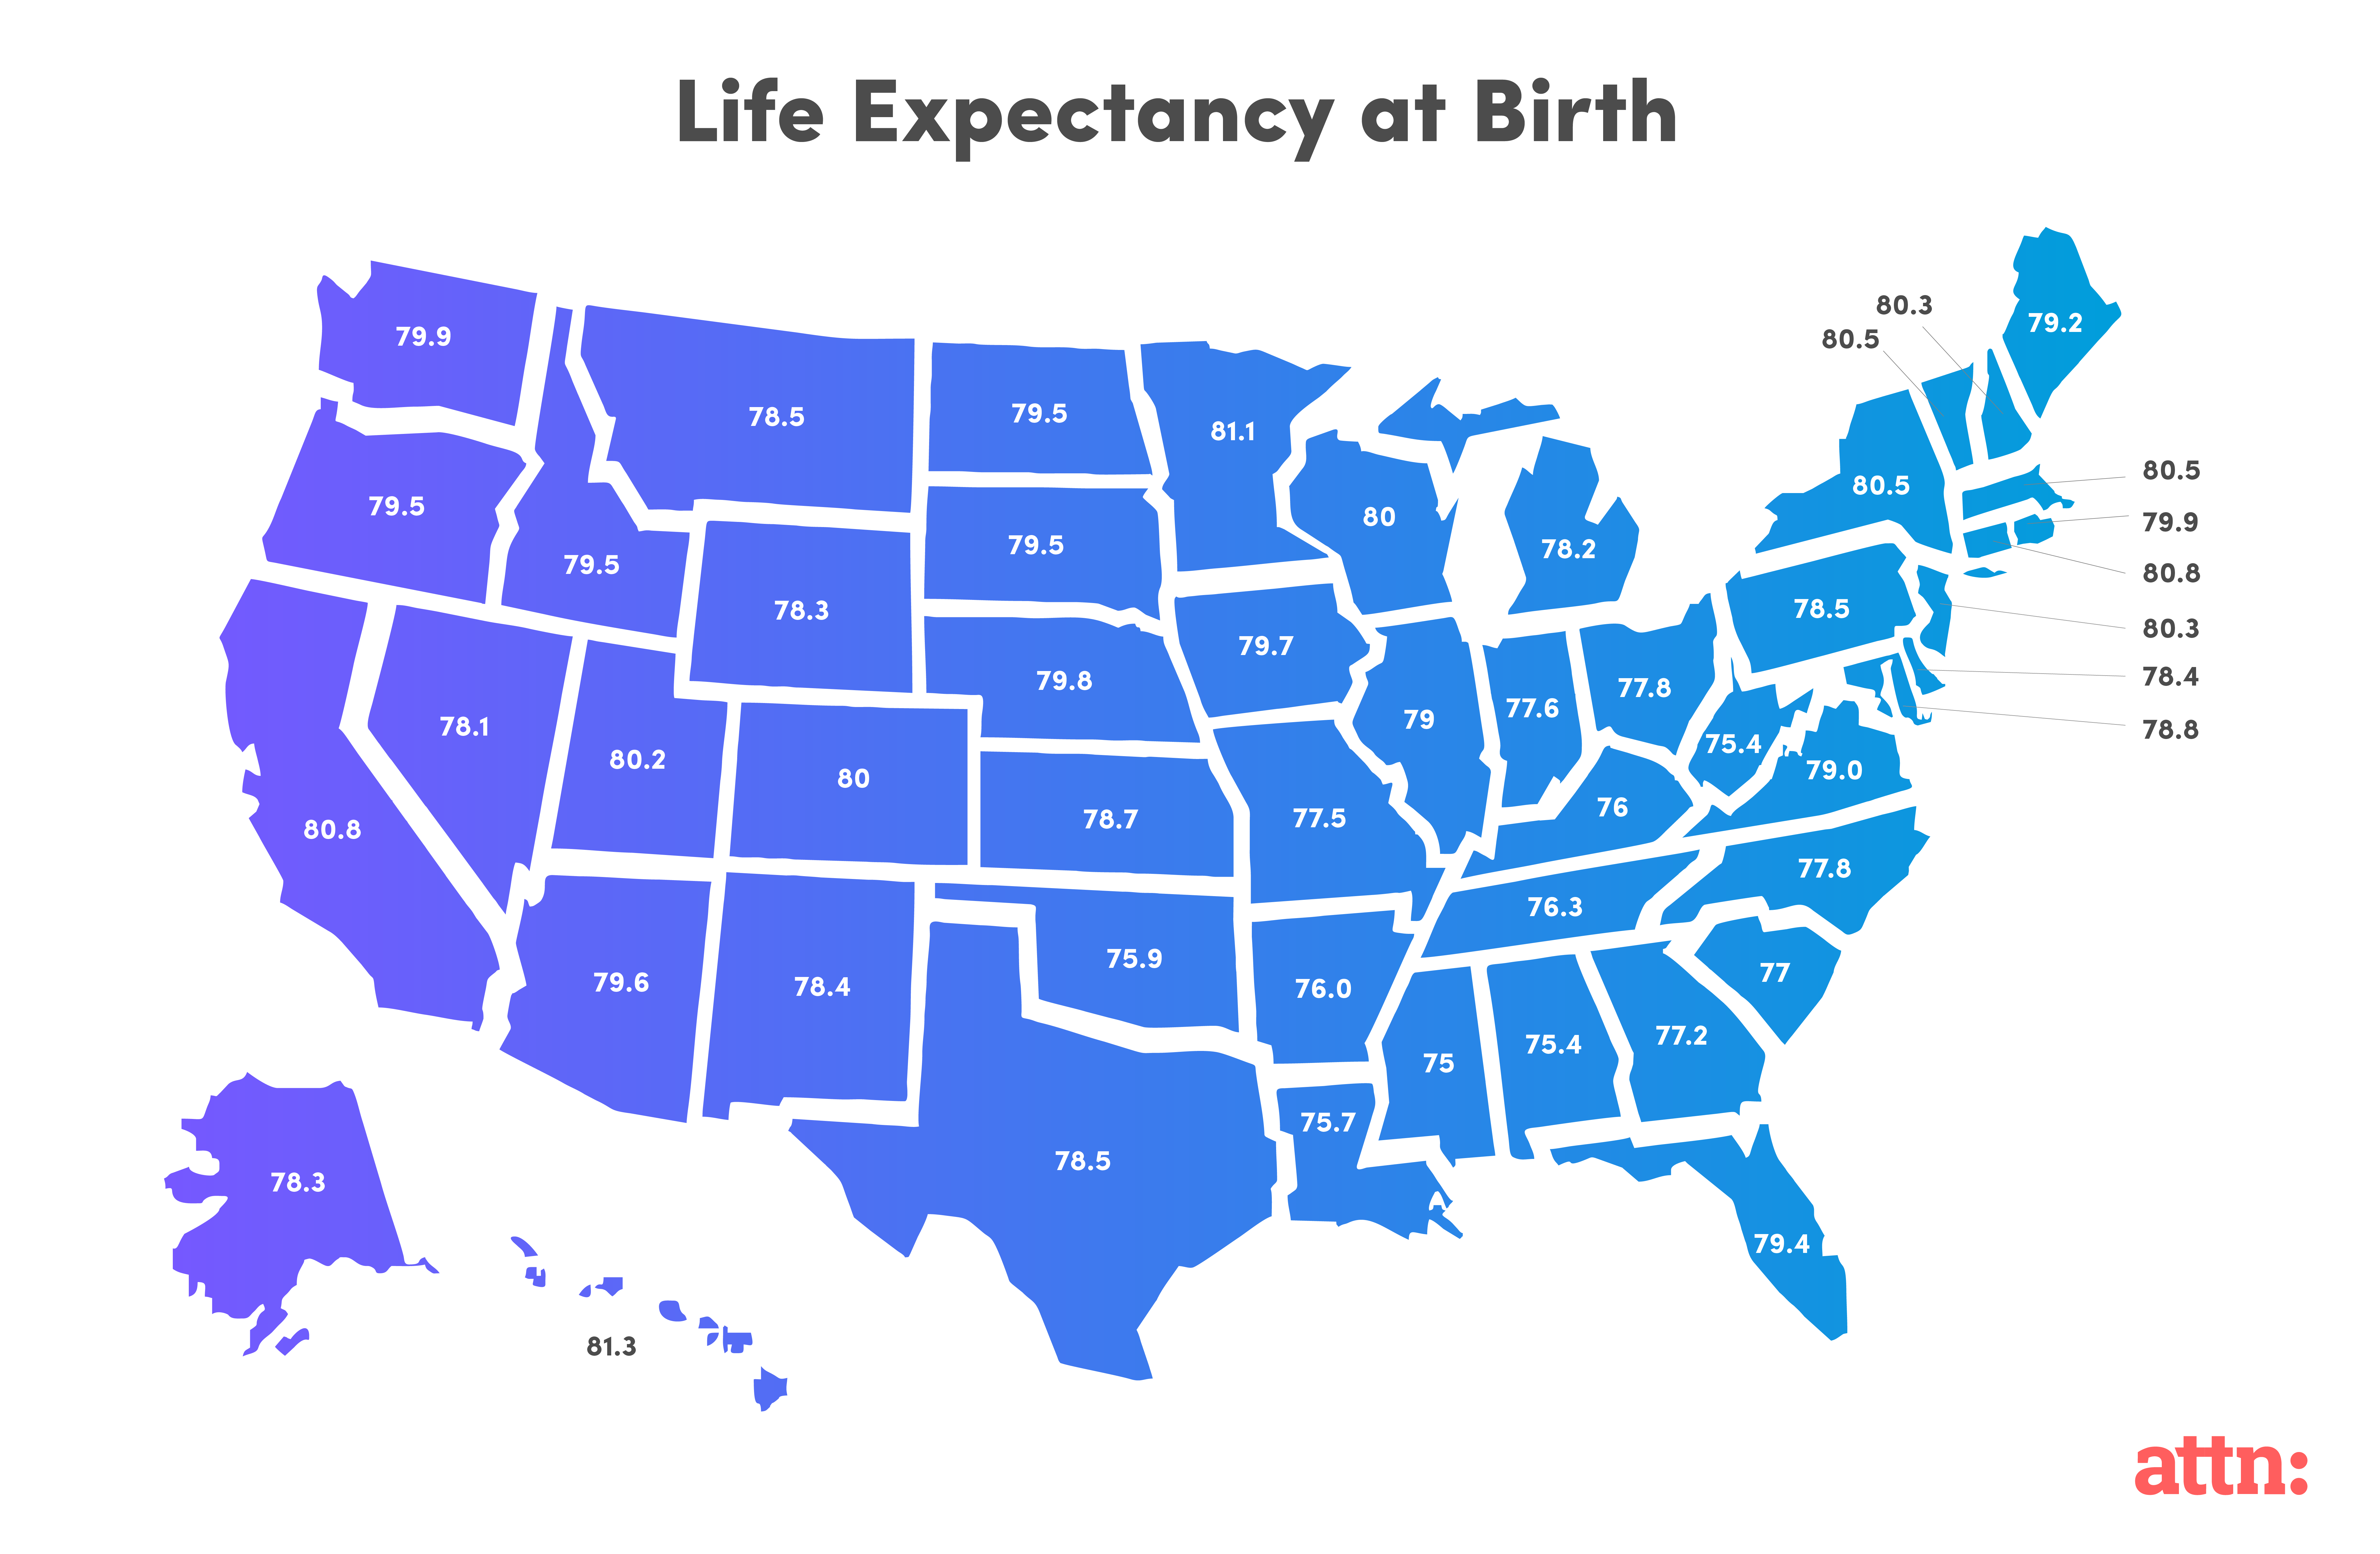 Life expectancy is. Life expectancy. Life expectancy by Country.